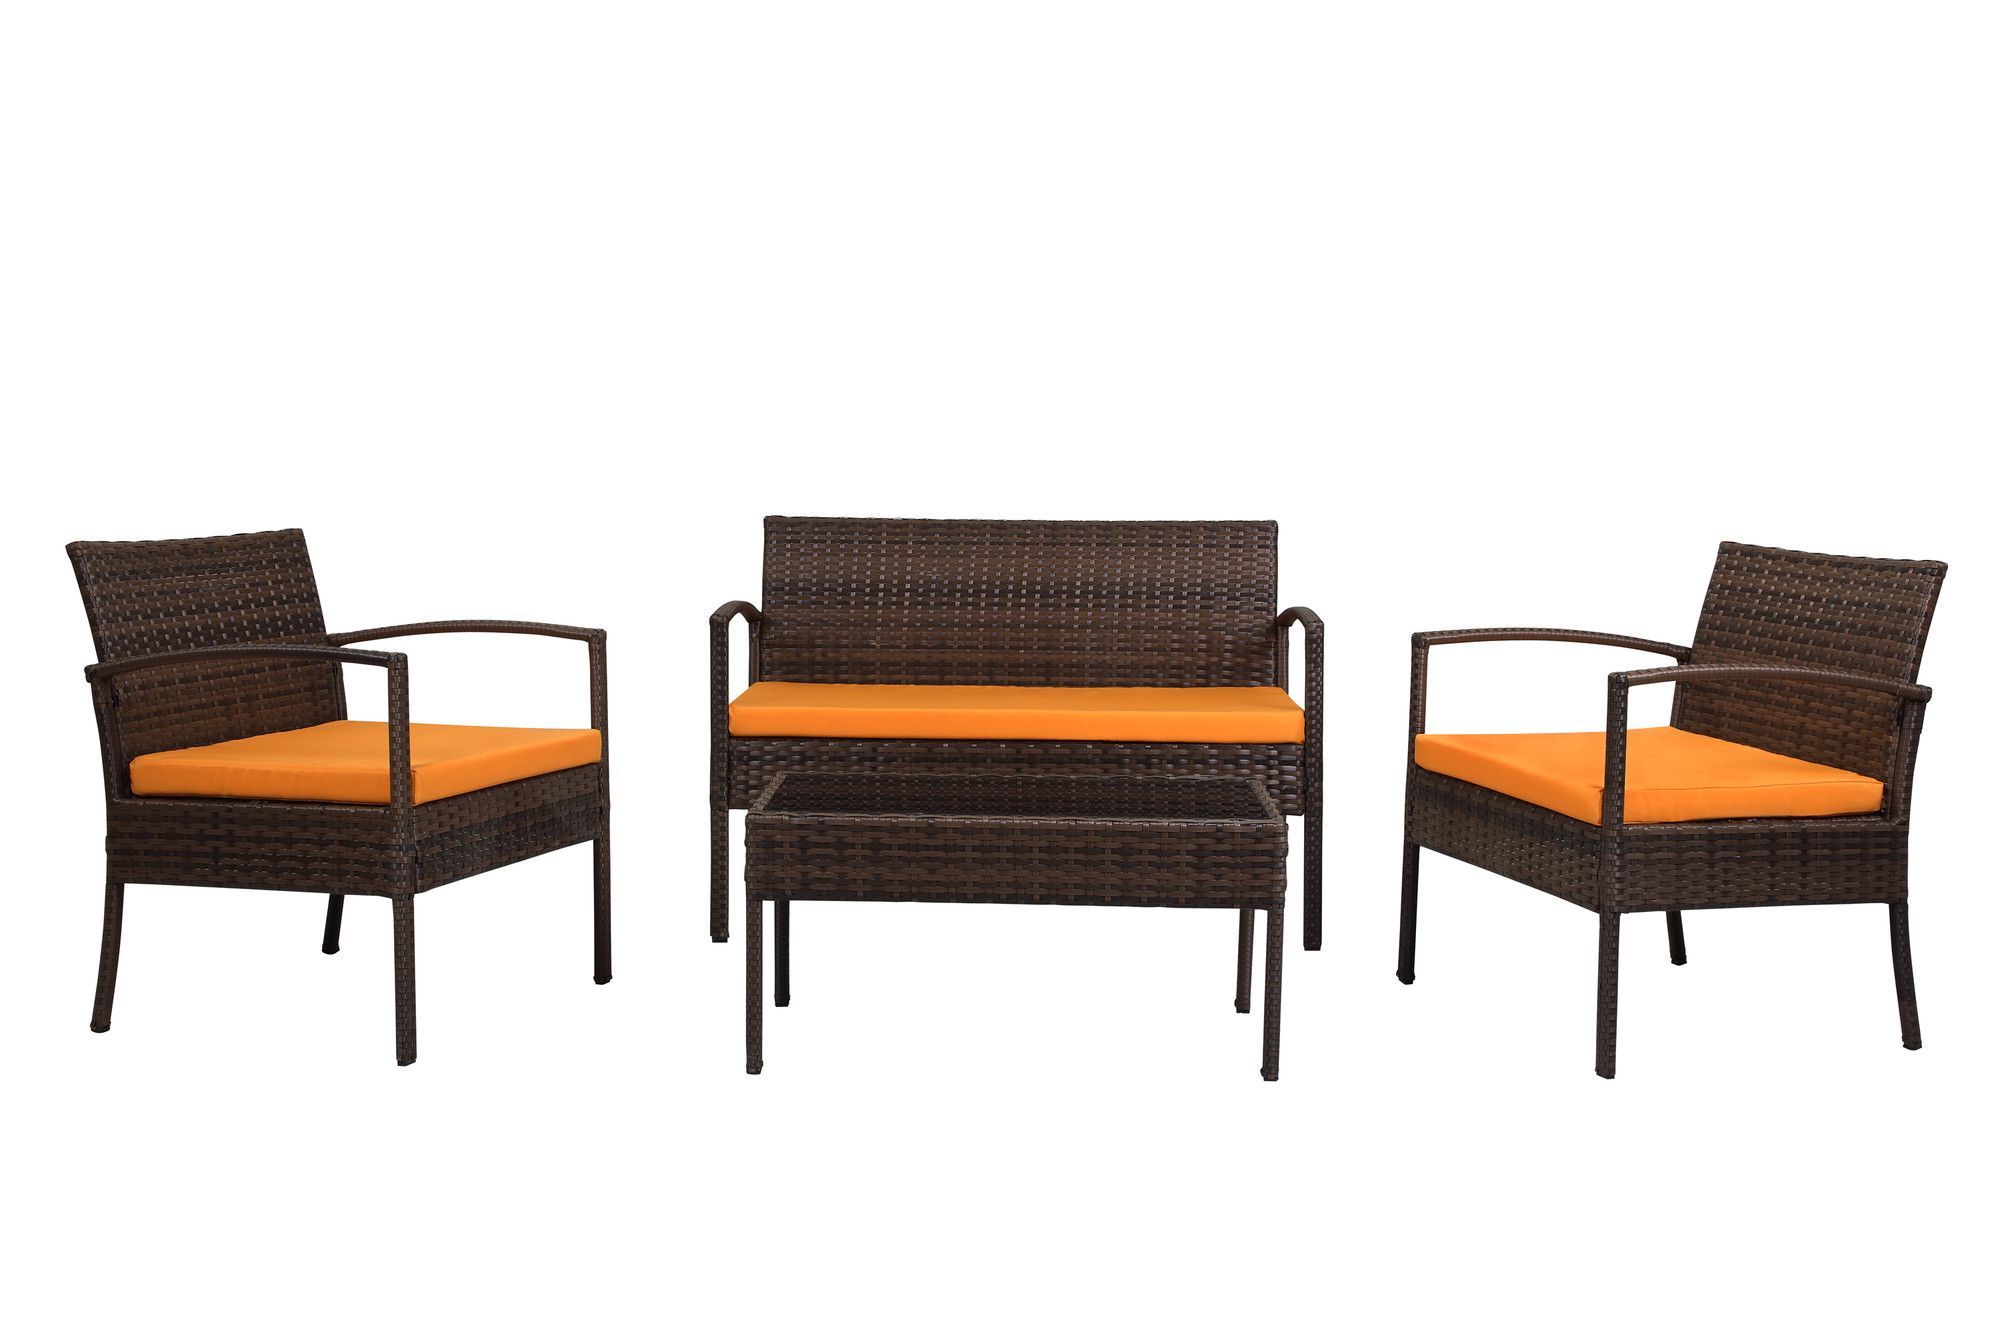 O'kean Teak Patio Sofas With Cushions Inside Well Known 4 Piece Wicker Seating Group With Cushions (View 13 of 25)